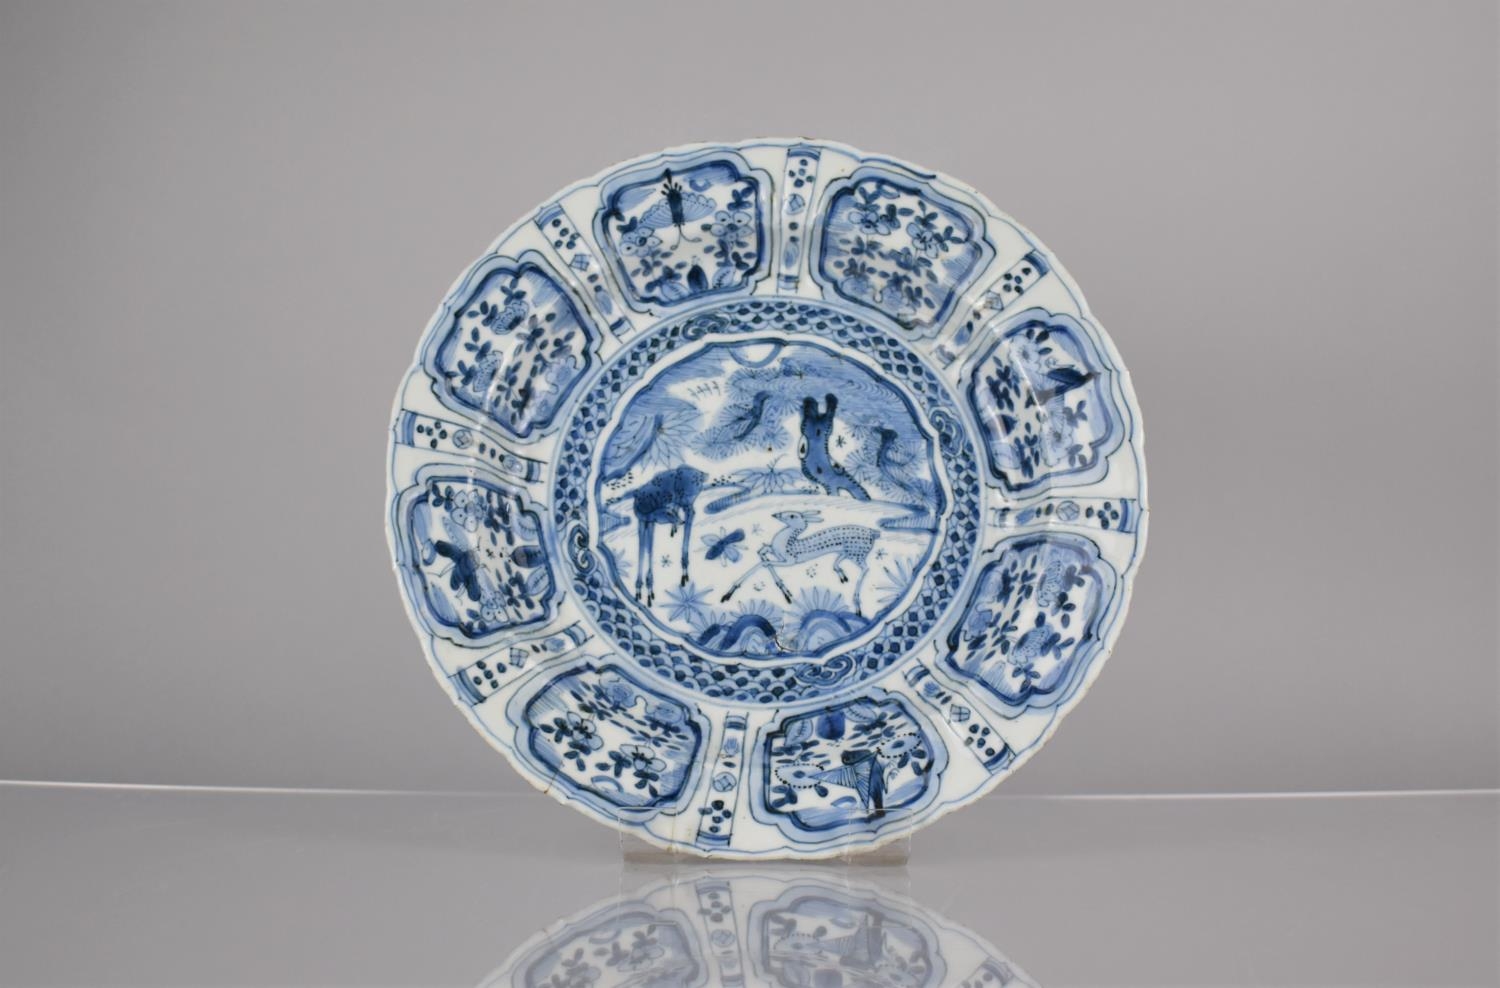 An Early Chinese Porcelain, Probably Kangxi Period (1662-1722) Blue and White Plate Decorated with